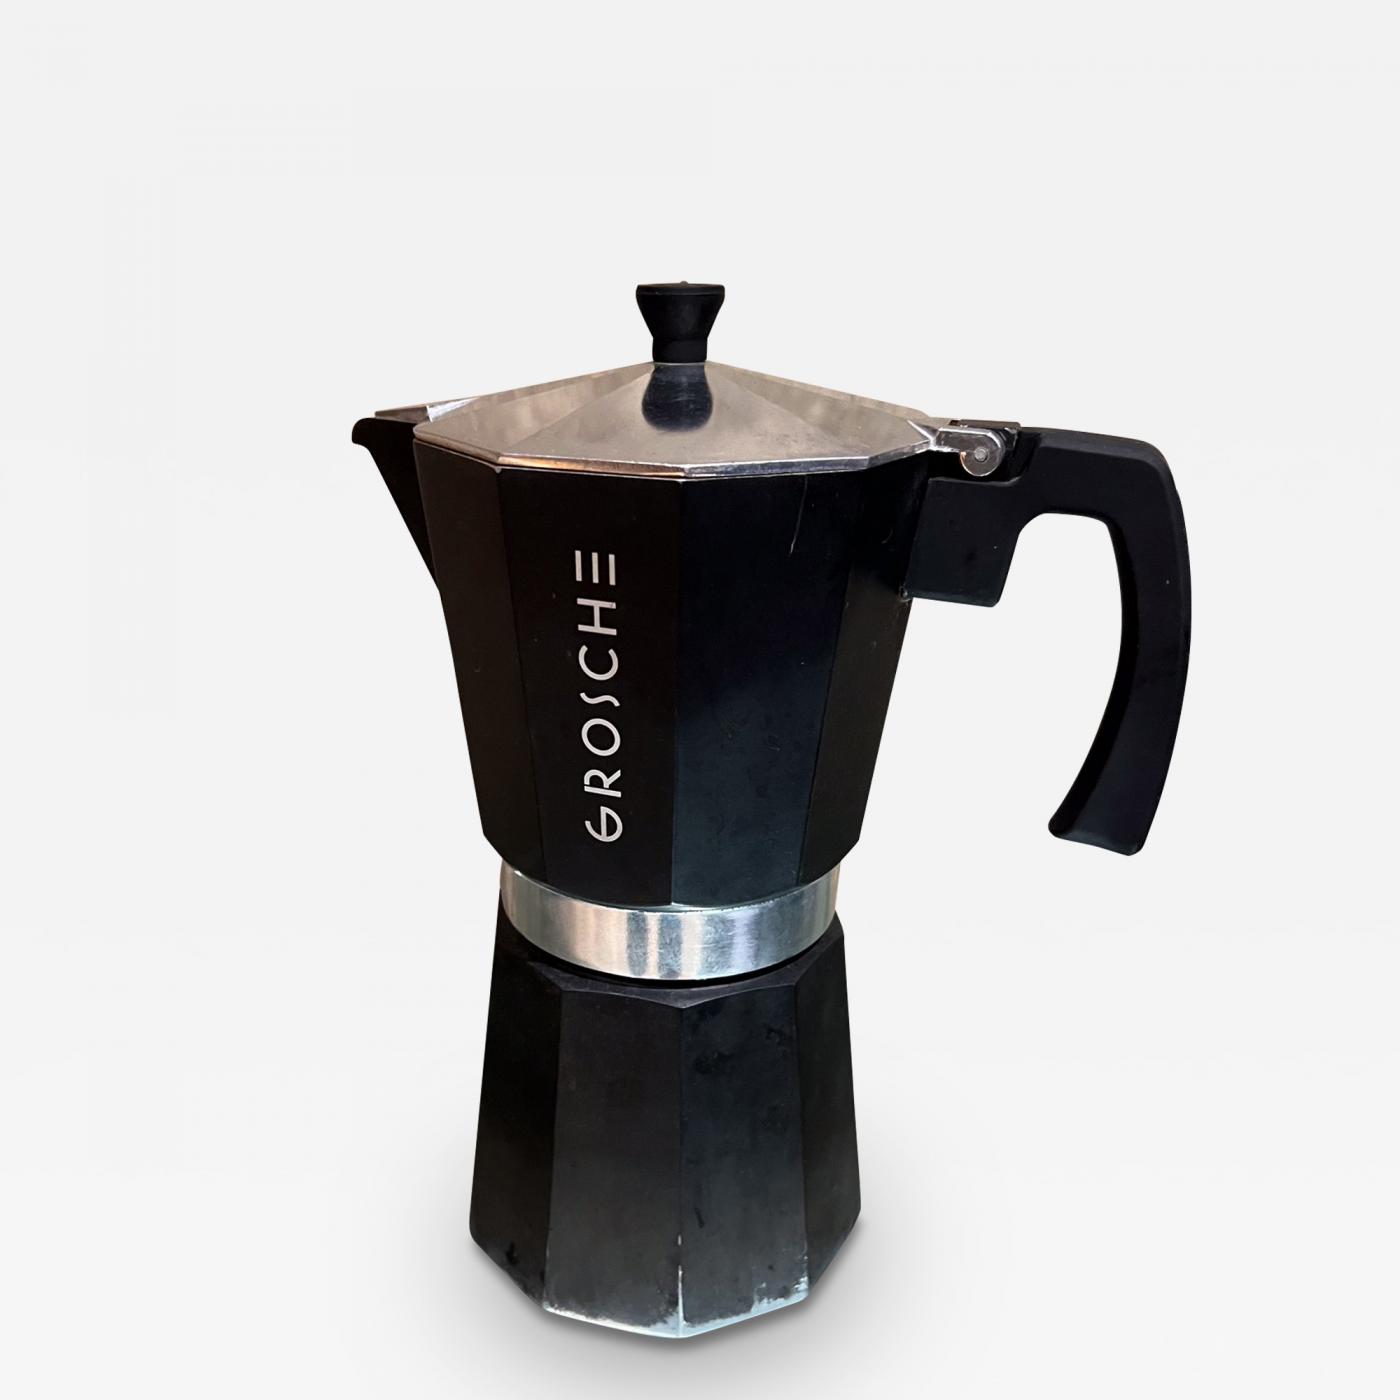 https://cdn.incollect.com/sites/default/files/zoom/Vintage-Milano-Large-Espresso-Coffee-Maker-Grosche-Italy-689701-3403969.jpg